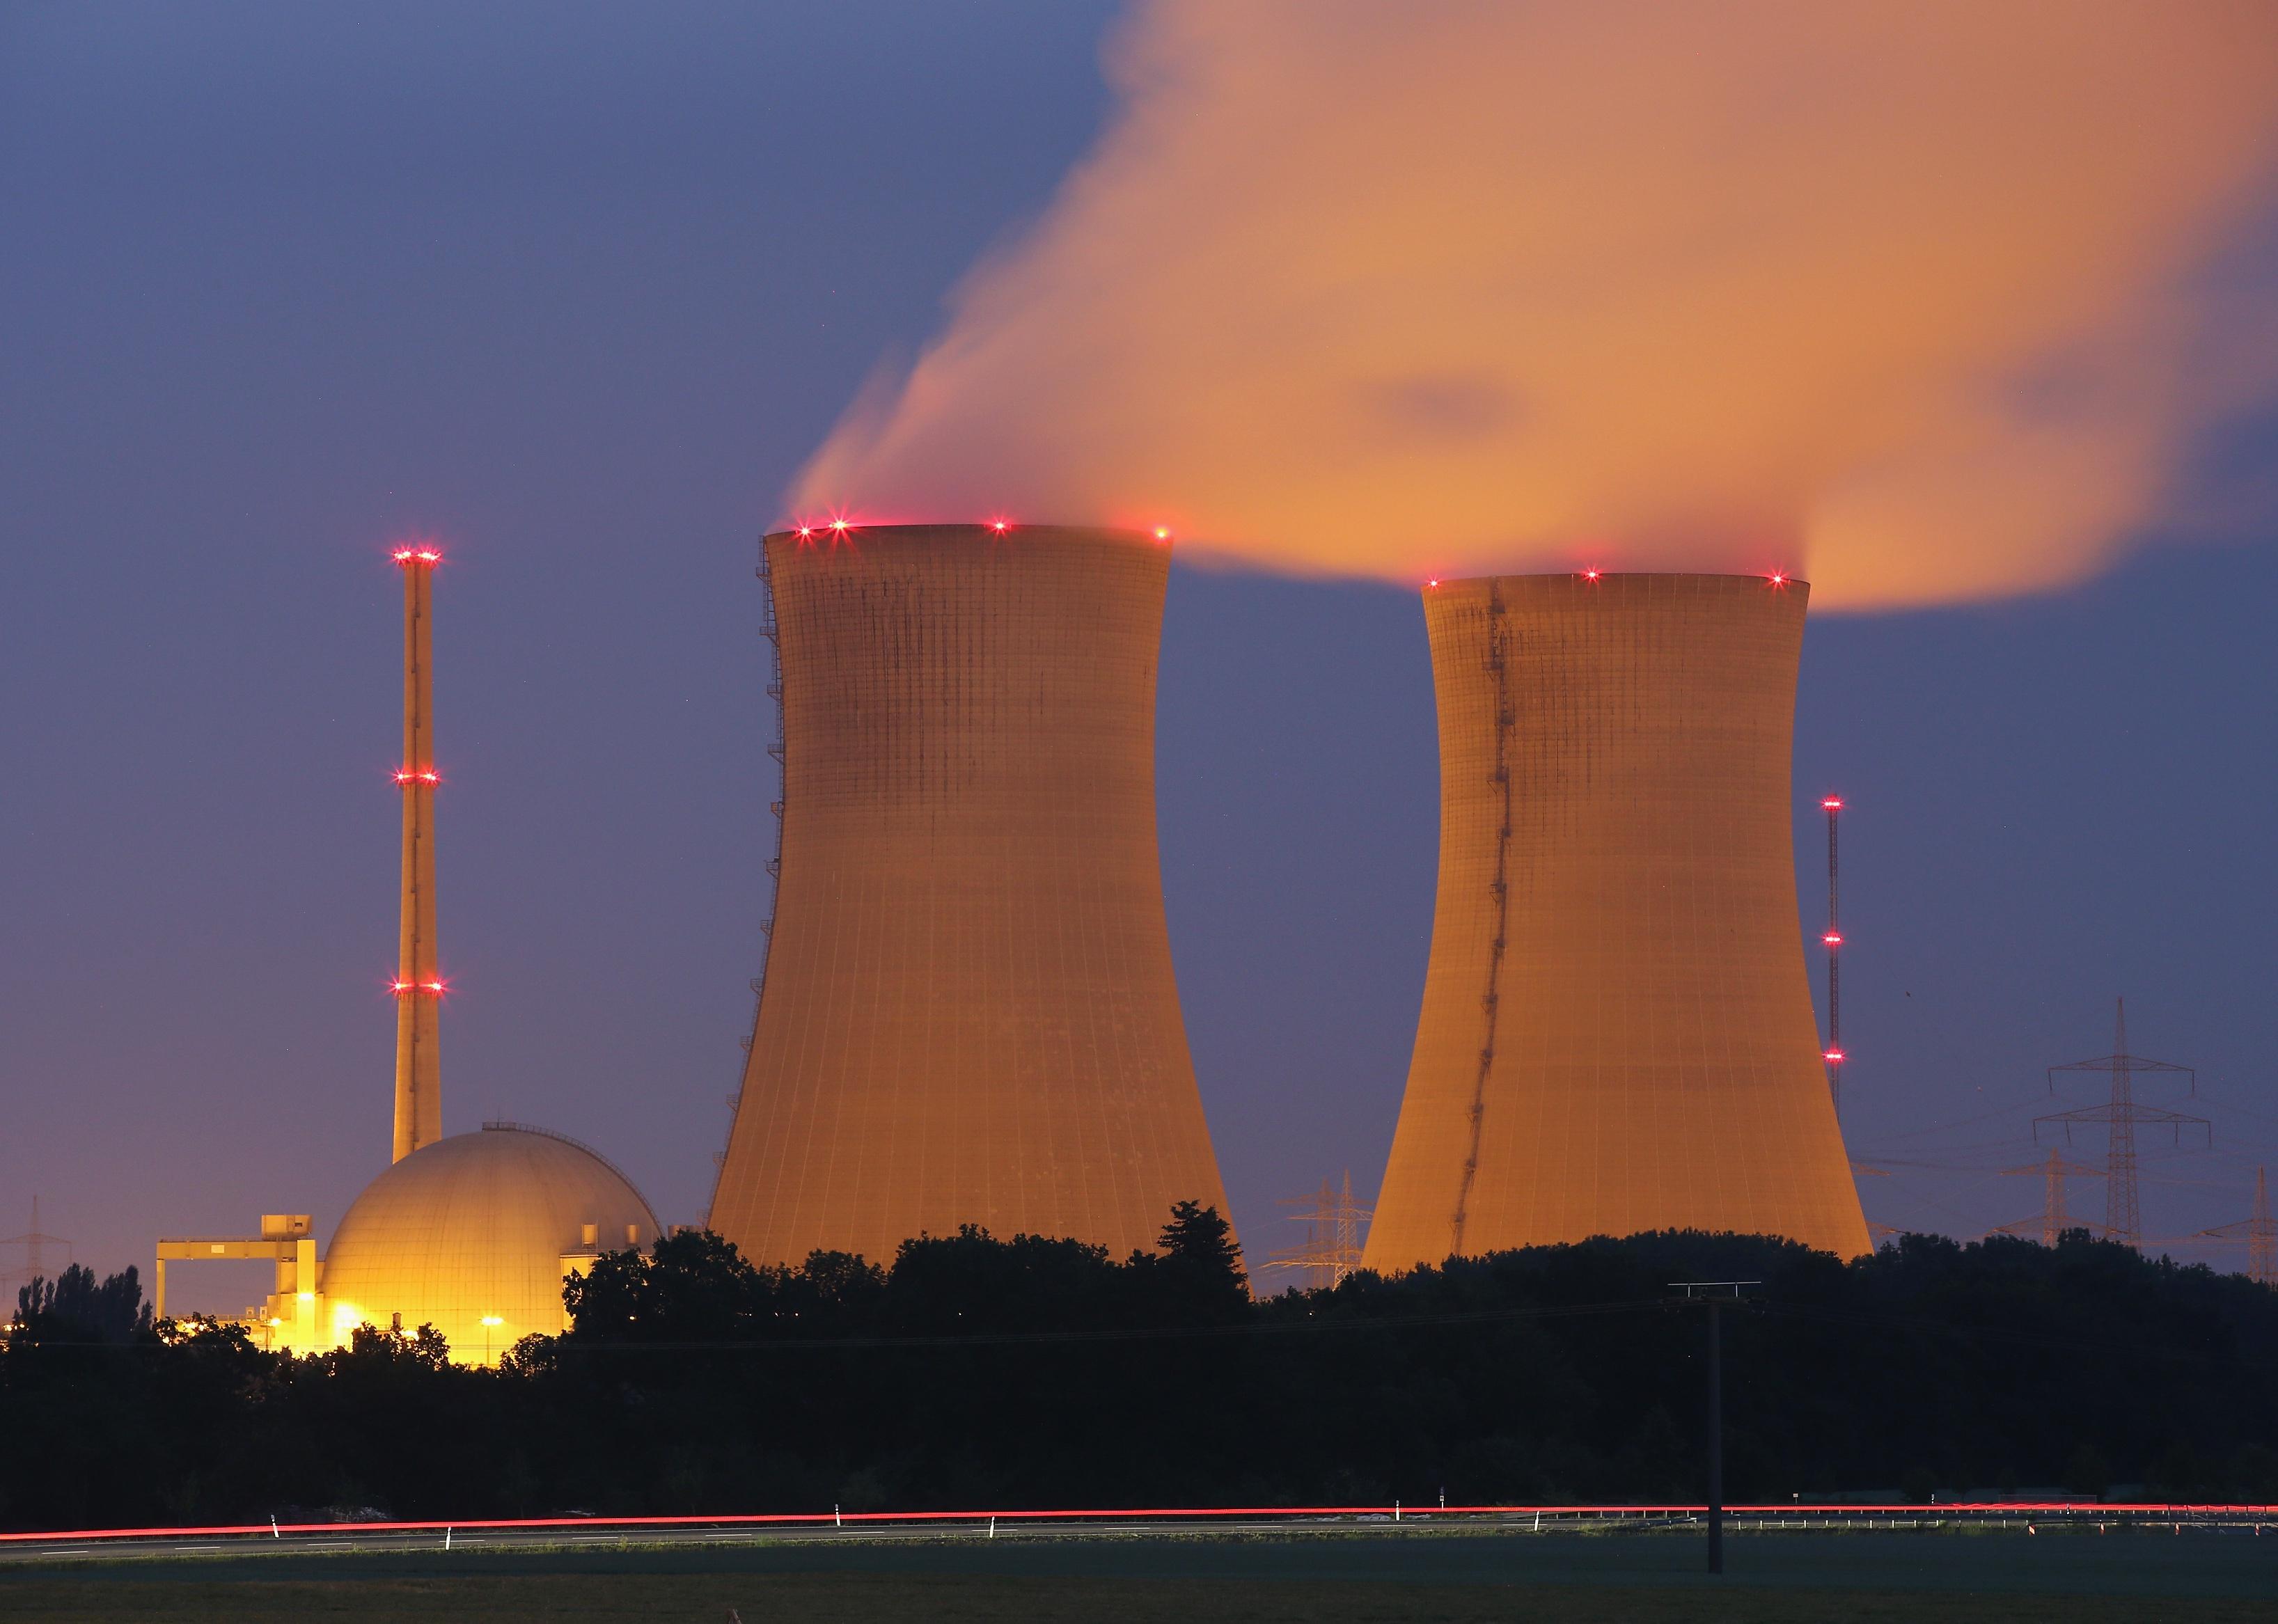 Steam rises from the cooling towers of a nuclear power plant in Germany.